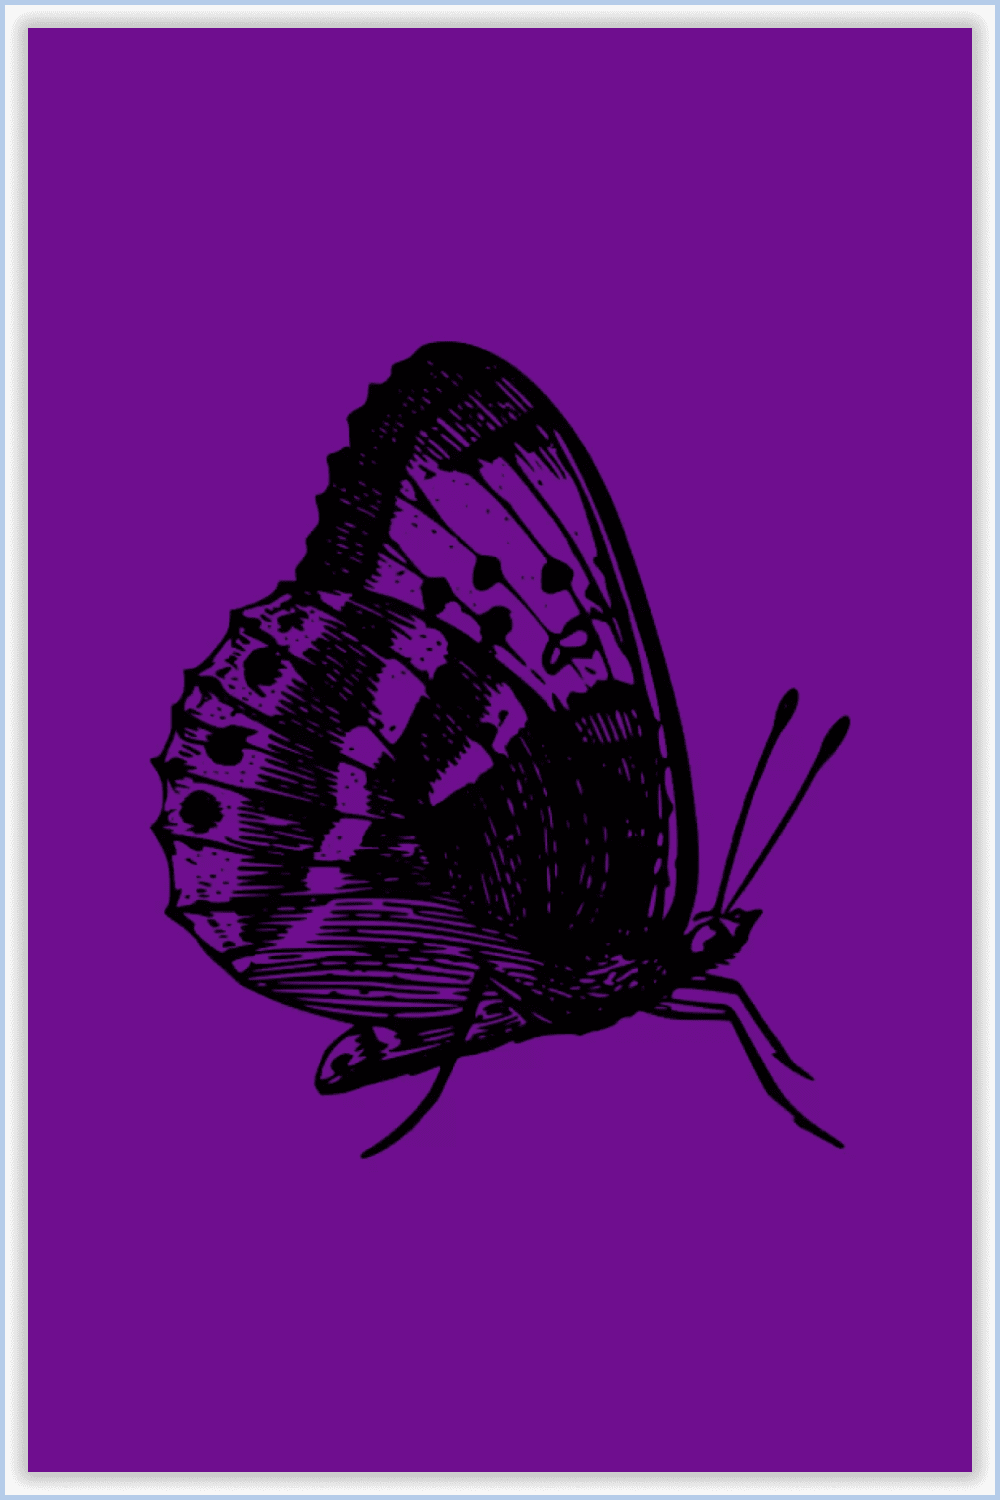 Butterfly in black color on the side on a purple background.